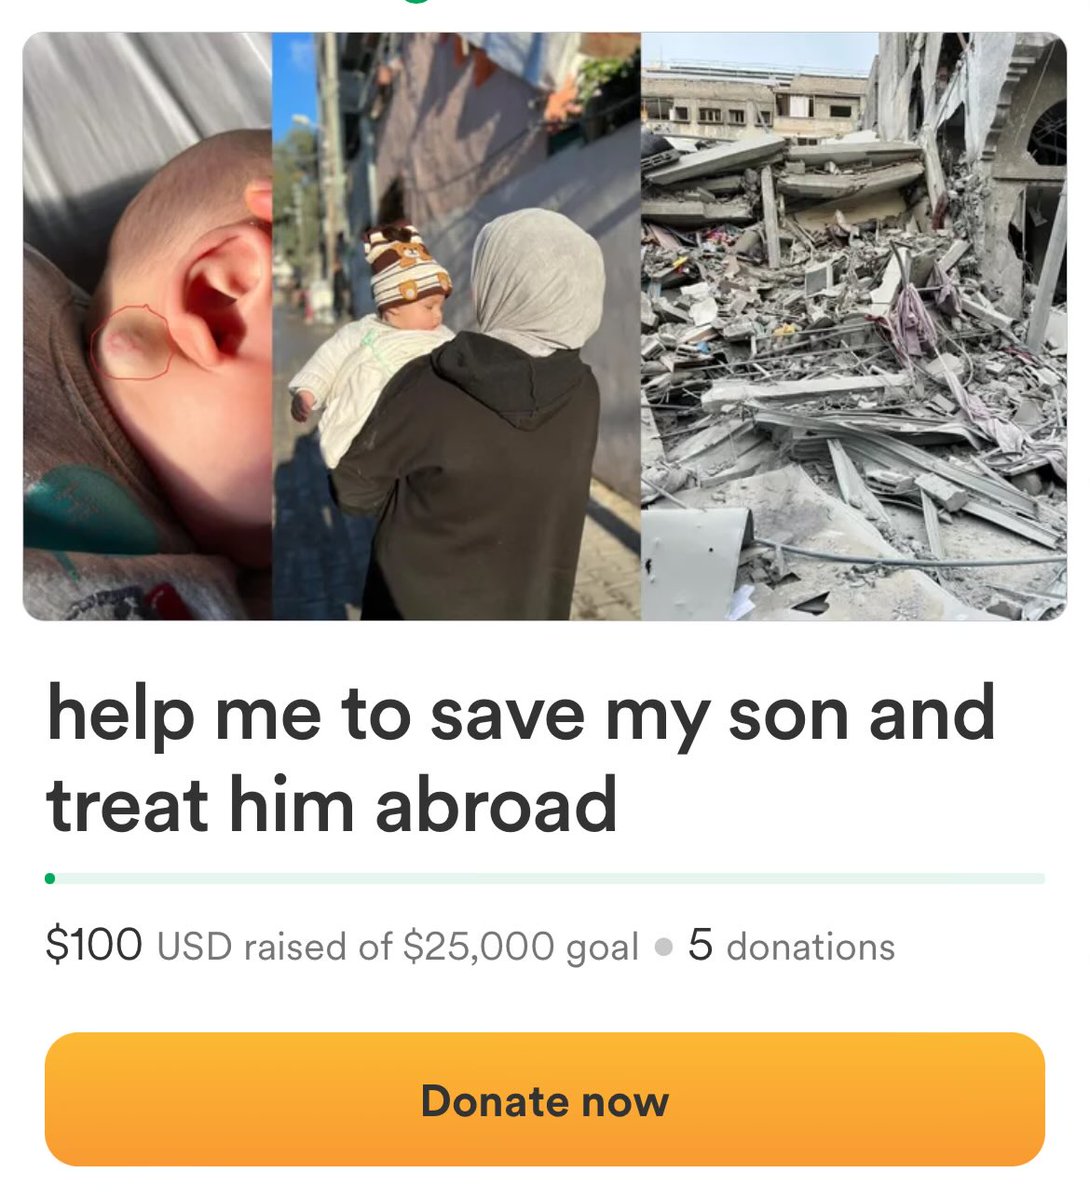 This family is so far from their goal, please donate if you’re able! Their son needs medical treatment!